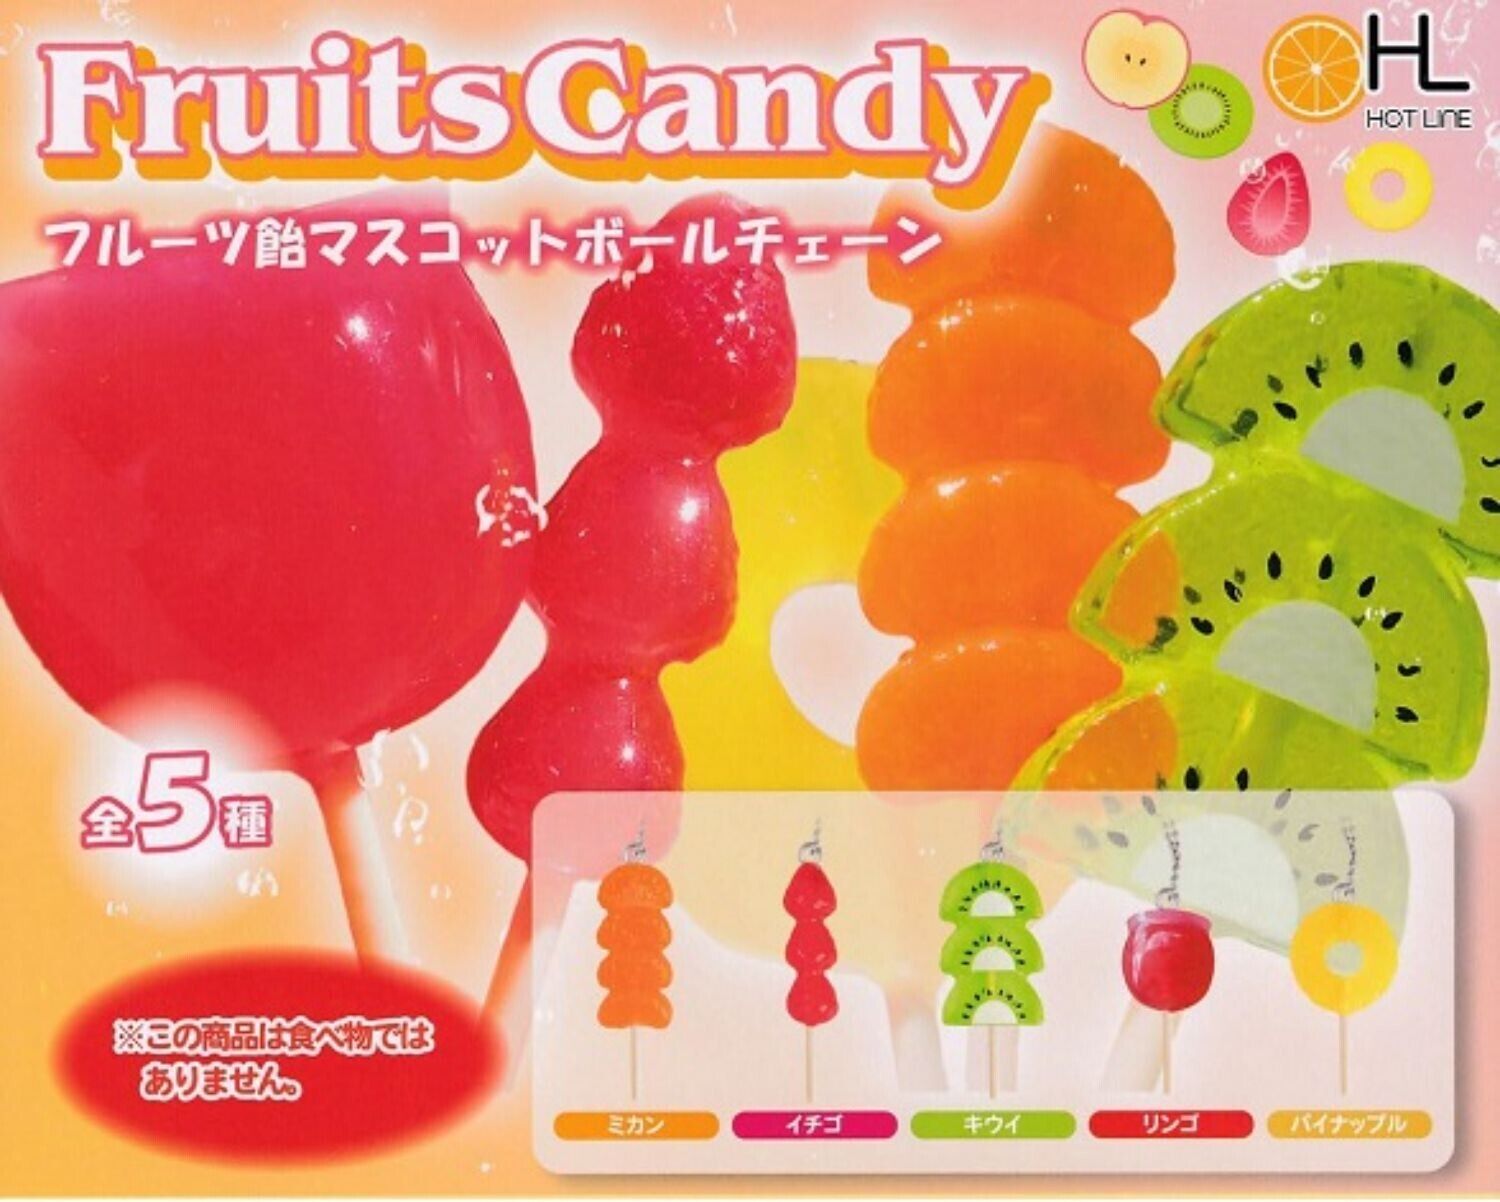 Fruit candy Mascot Chain Capsule Toy 5 Types Full Comp Set Gacha New Japan